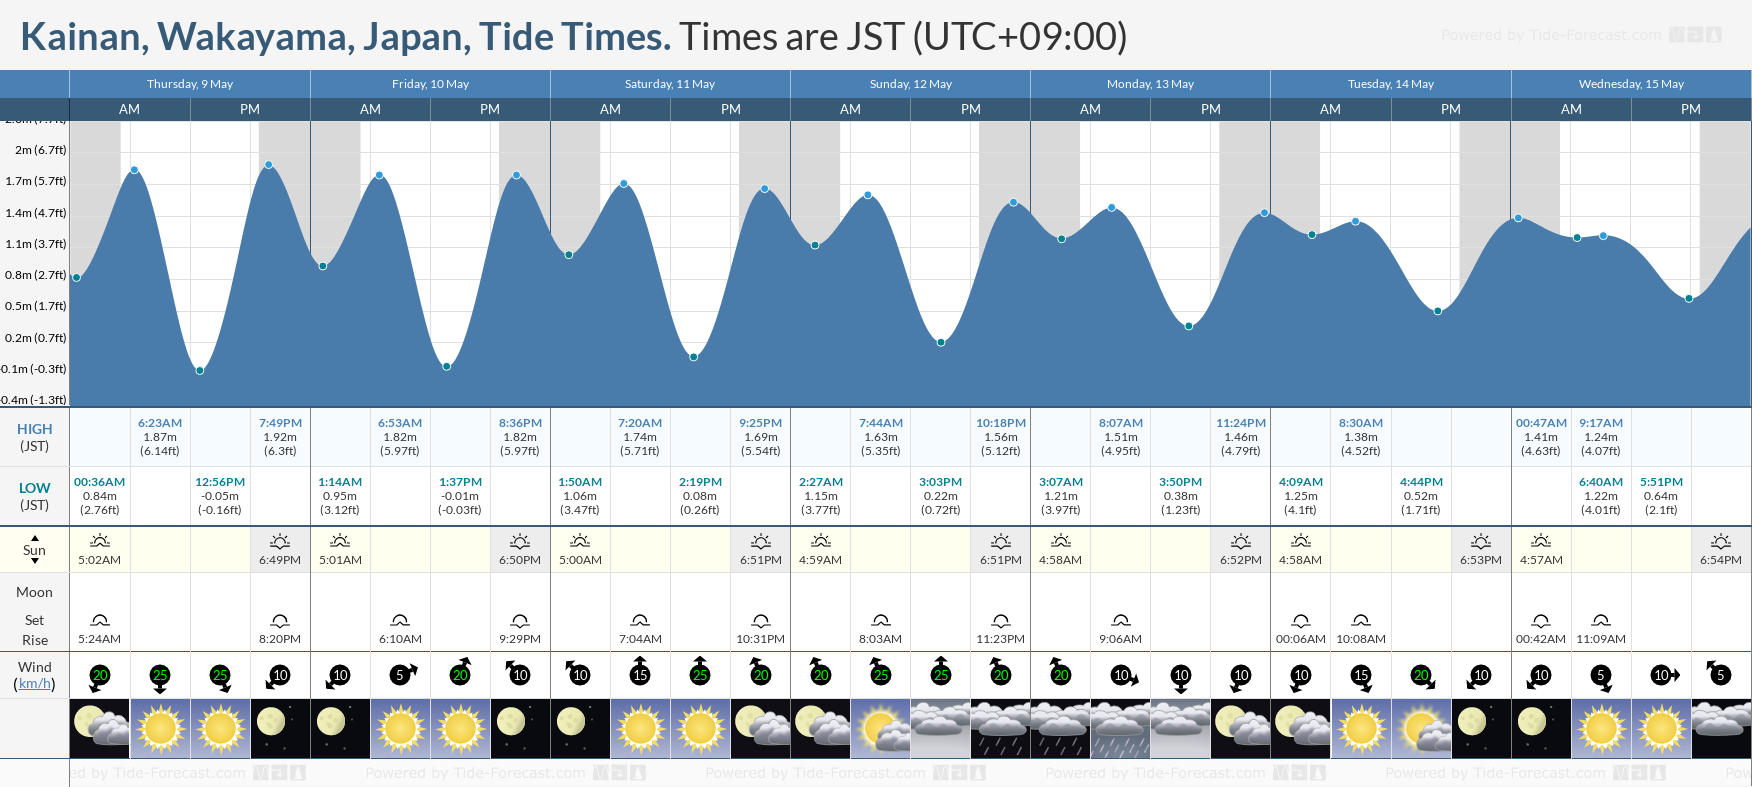 Kainan, Wakayama, Japan Tide Chart including high and low tide tide times for the next 7 days